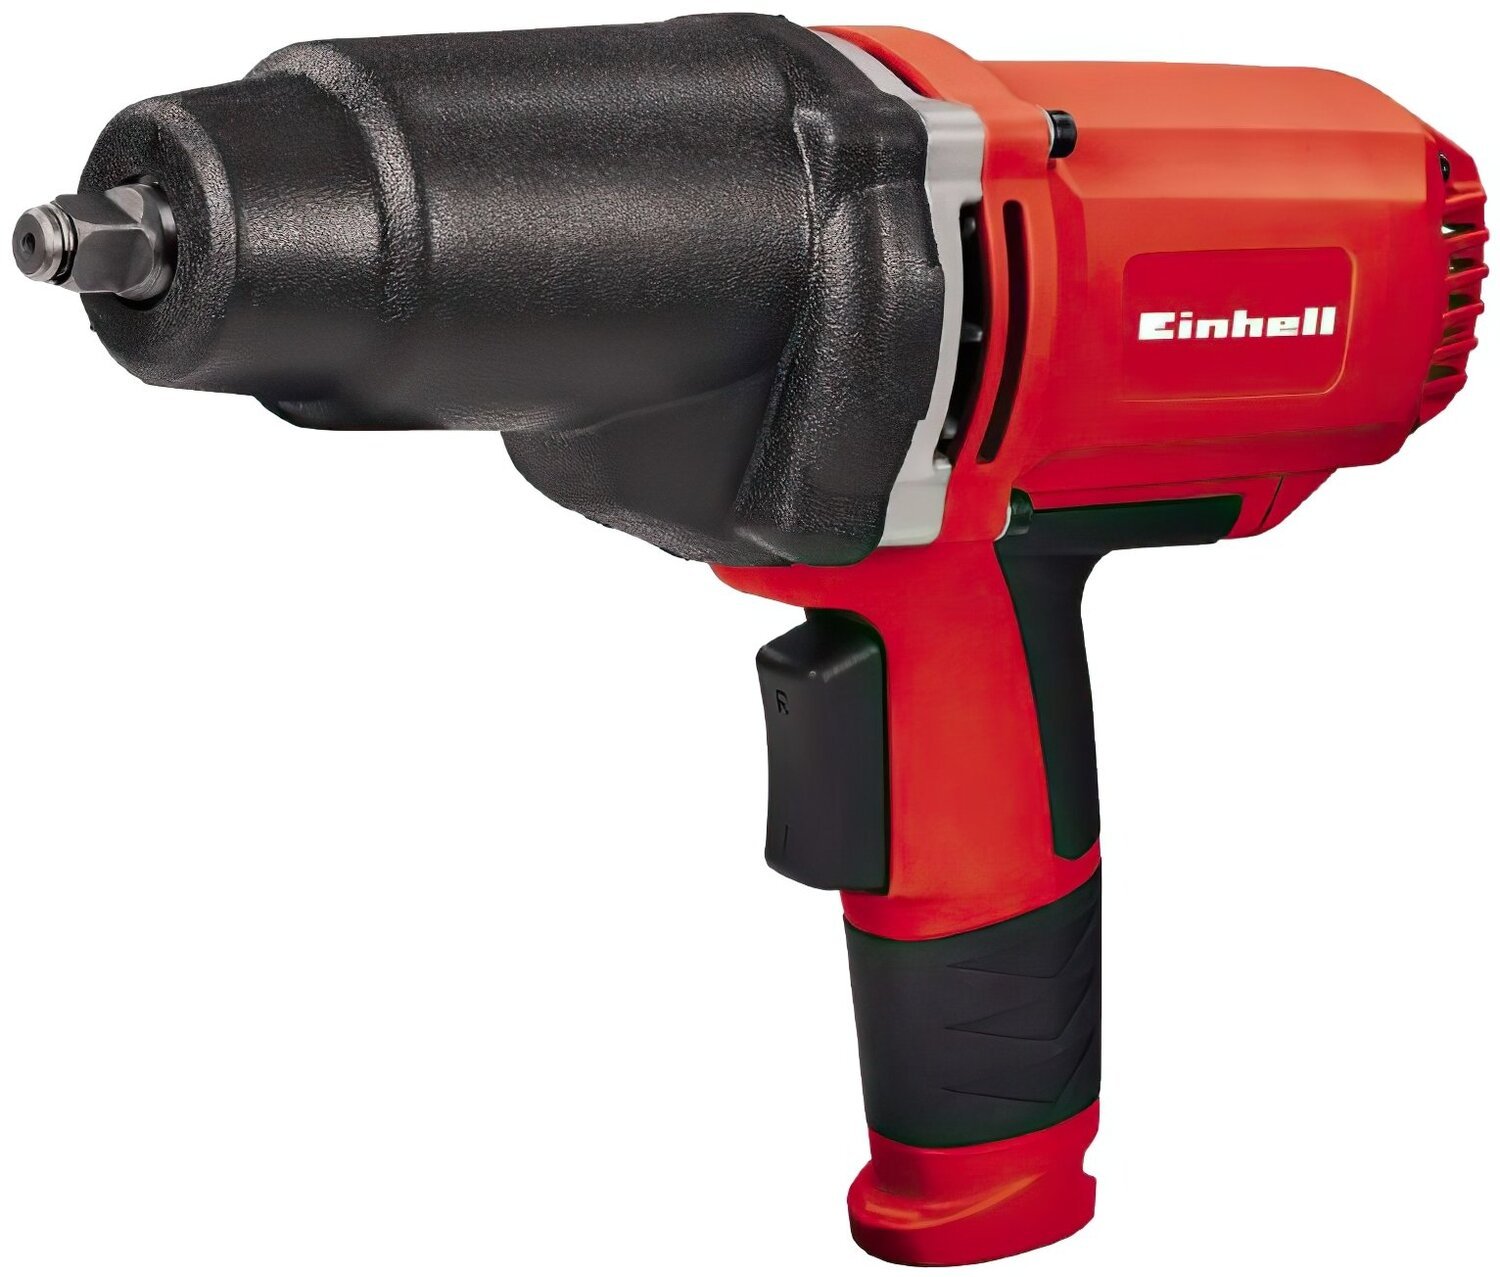 Einhell impact wrench: specifications, ndemanga, Einhell CC-IW 950 wrench